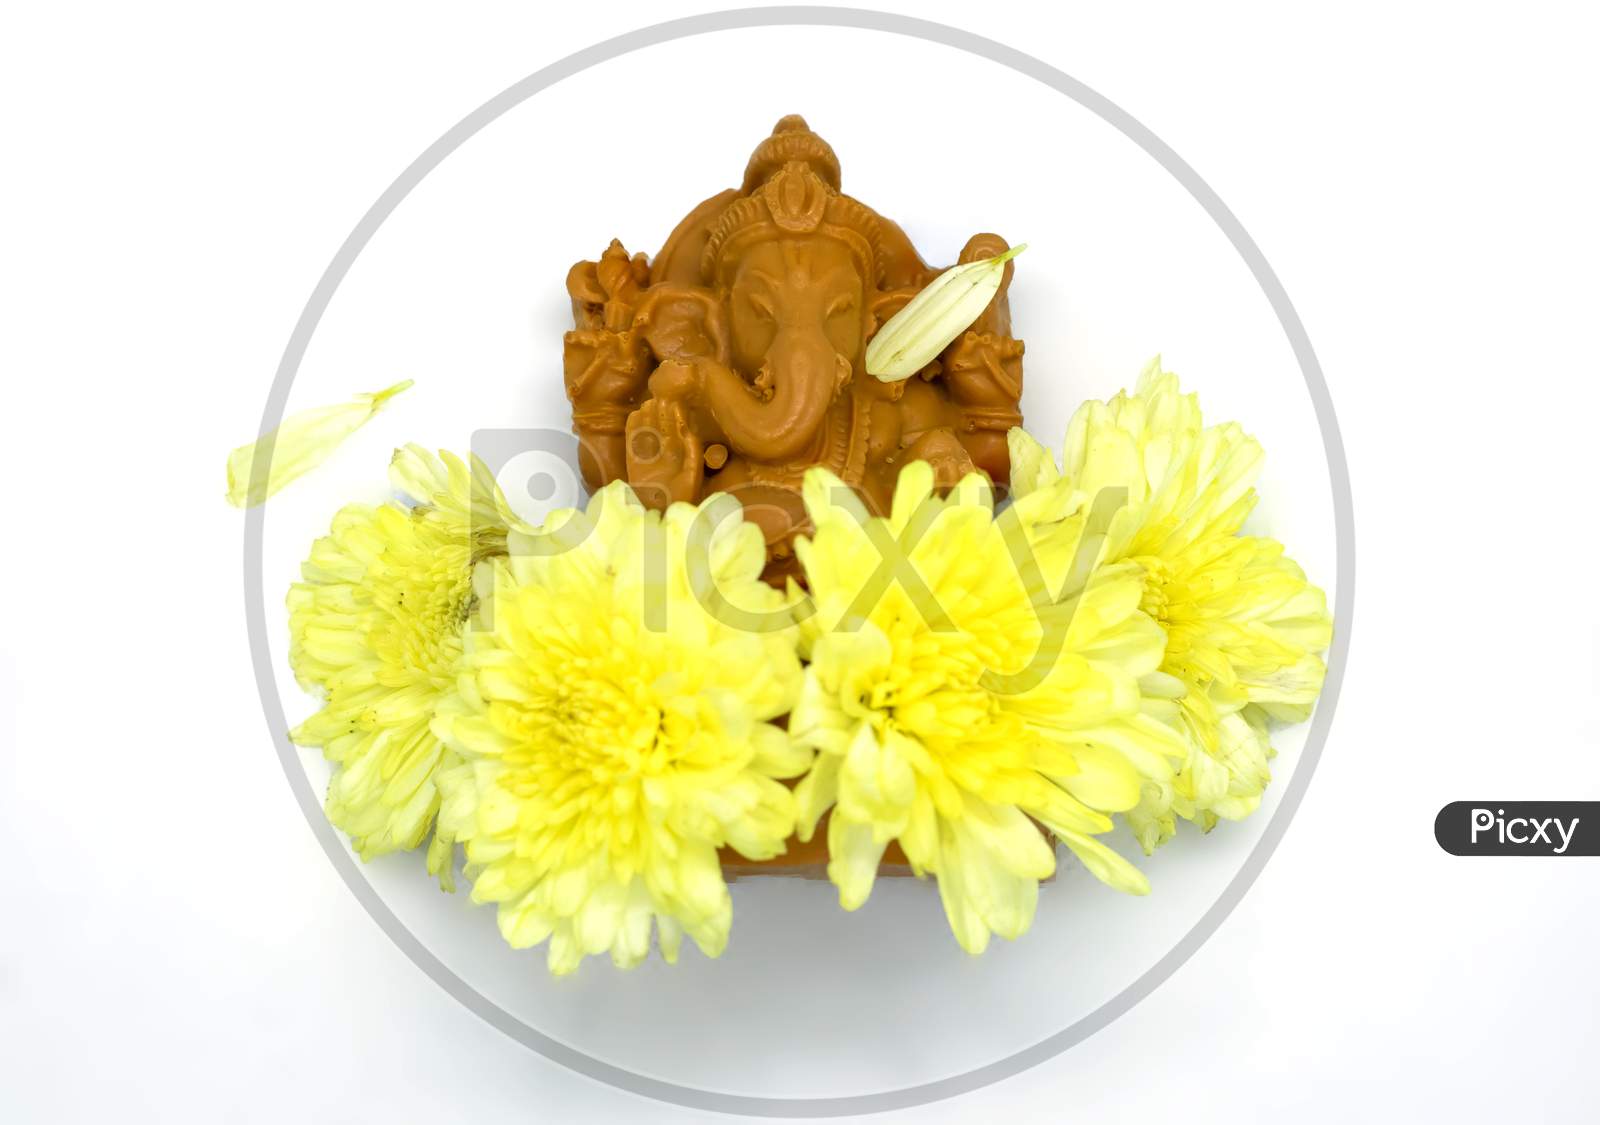 Ganesha Statue With Yellow Flowers Of Hindu God On White Background At The Top View